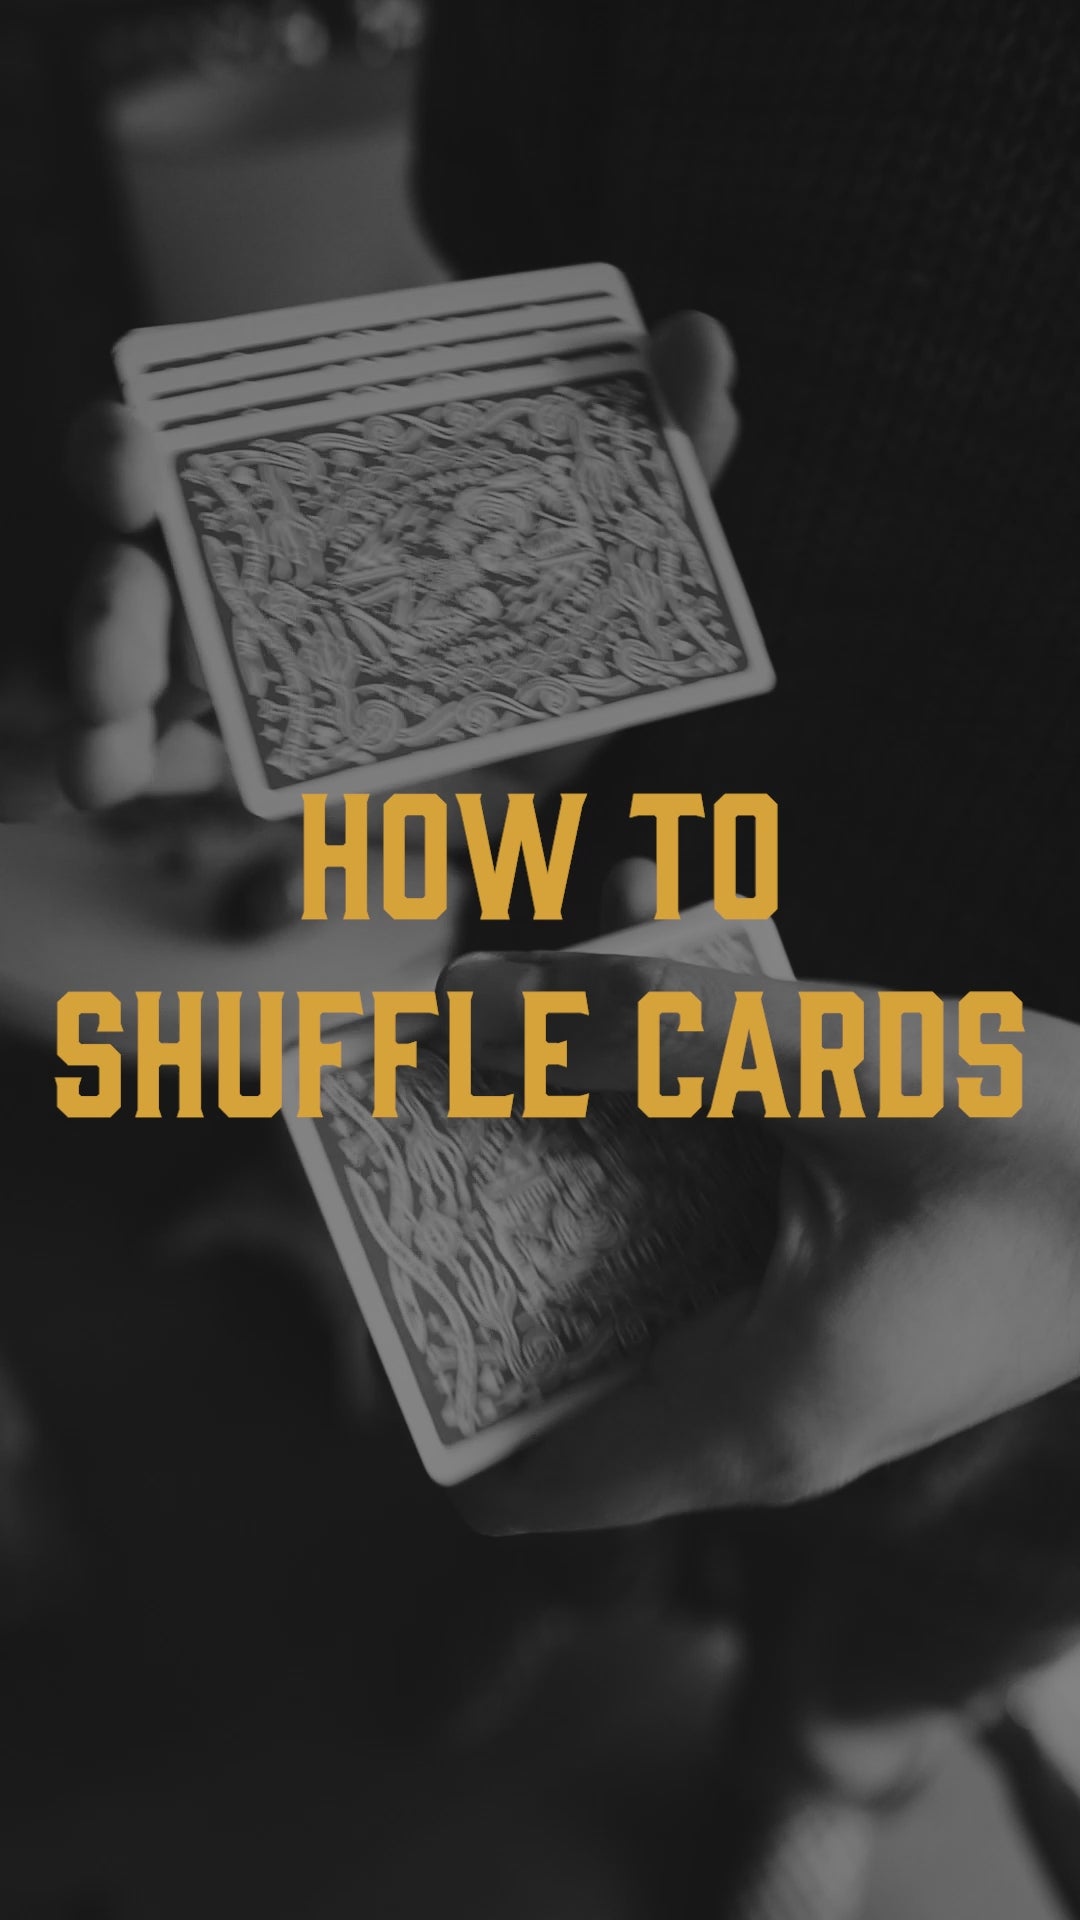 How to Shuffle Playing Cards Video Course